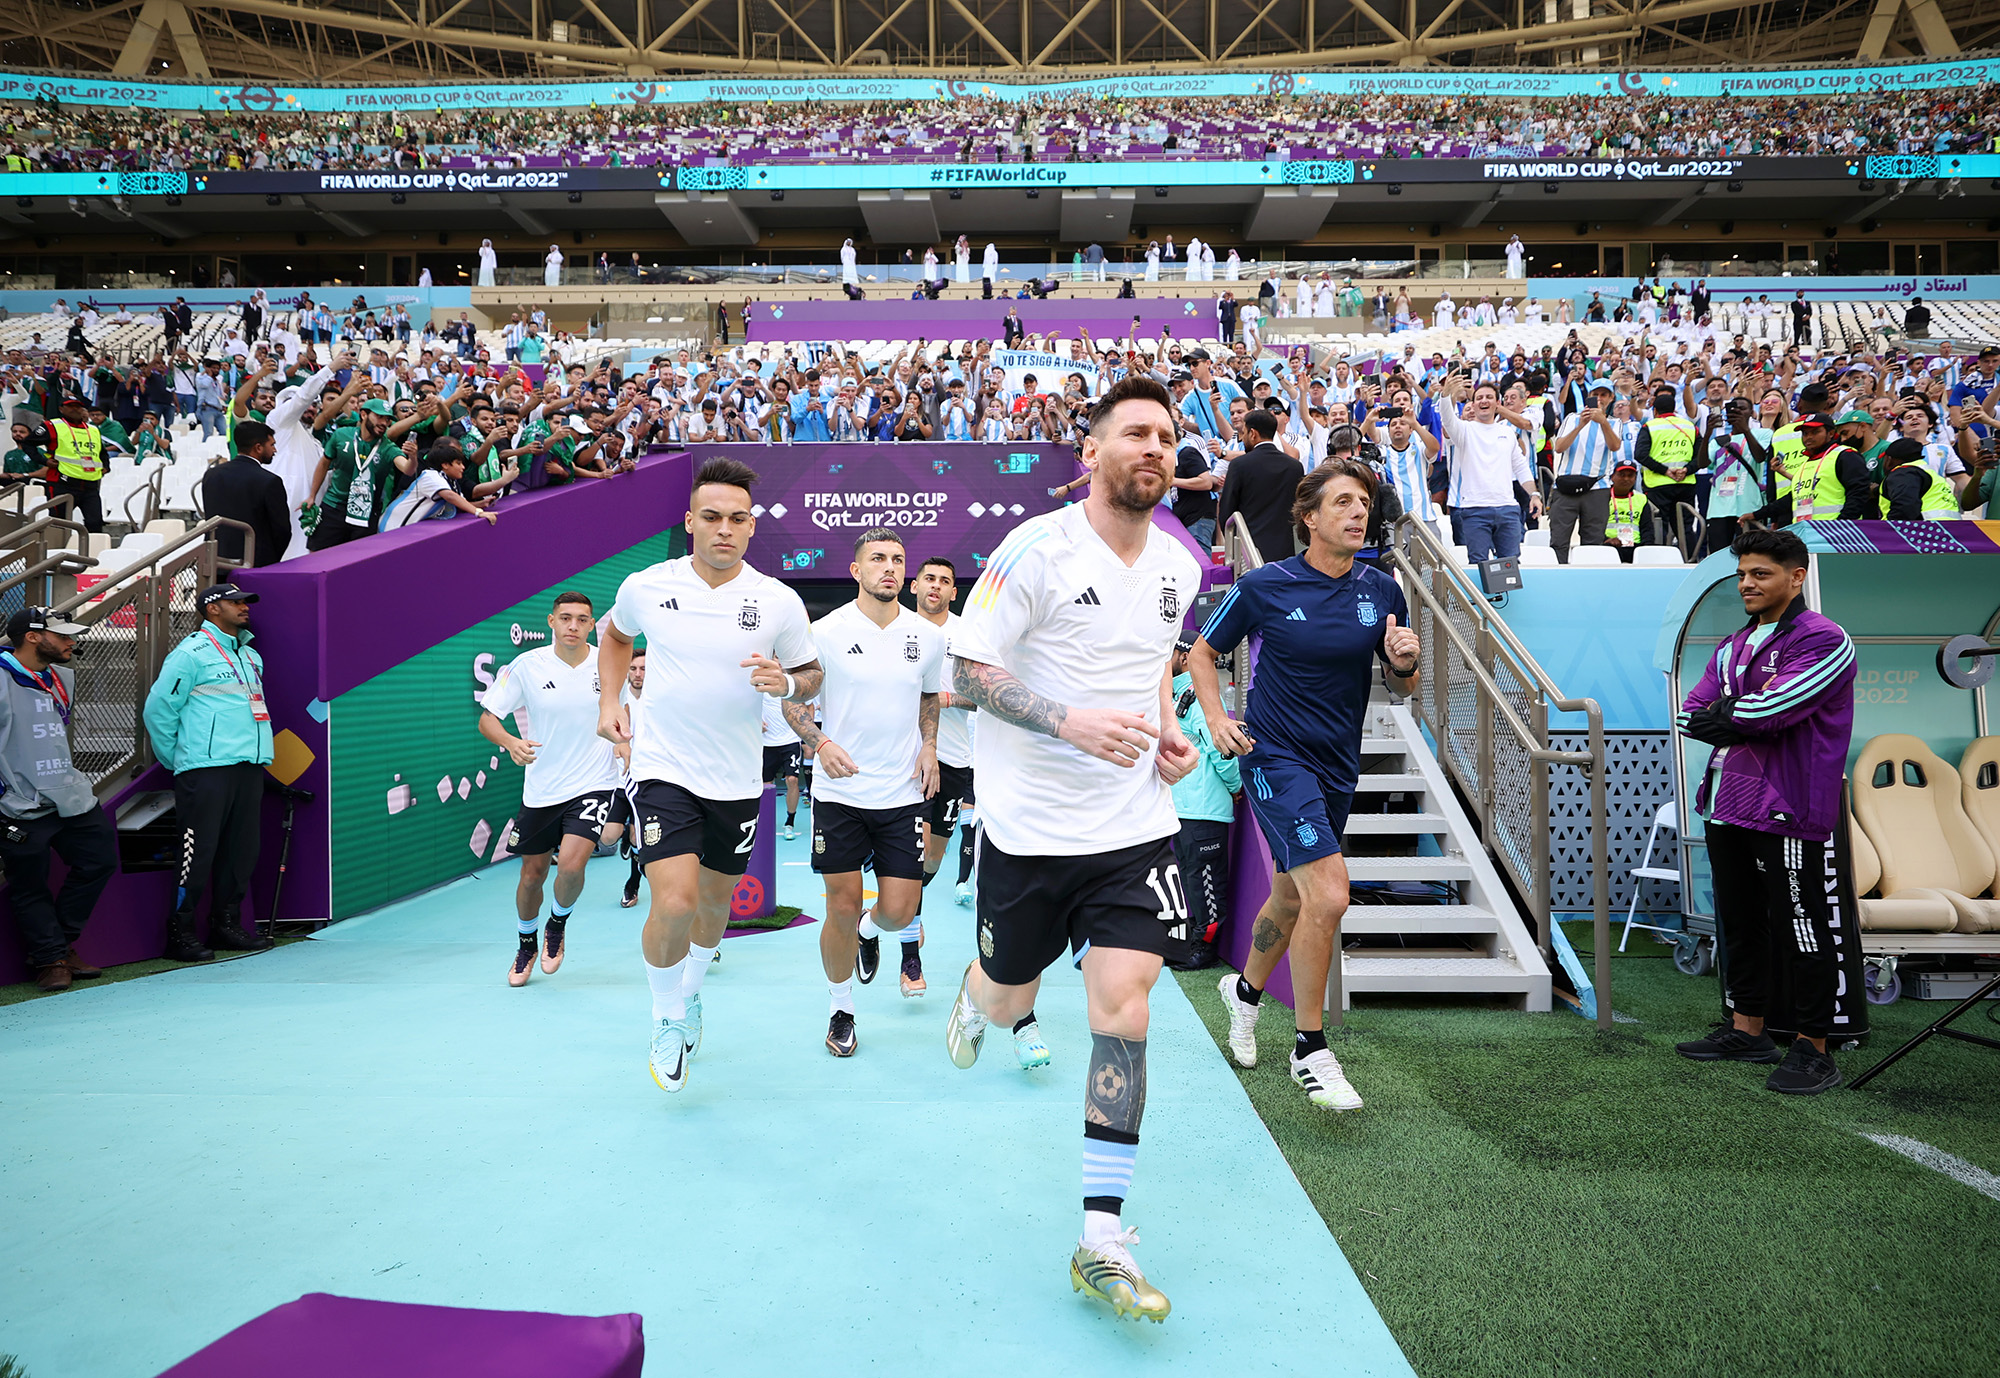 Lionel Messi of Argentina leads the team onto the pitch for warm ups prior to the FIFA World Cup Qatar 2022 Group C match between Argentina and Saudi Arabia at Lusail Stadium on November 22.